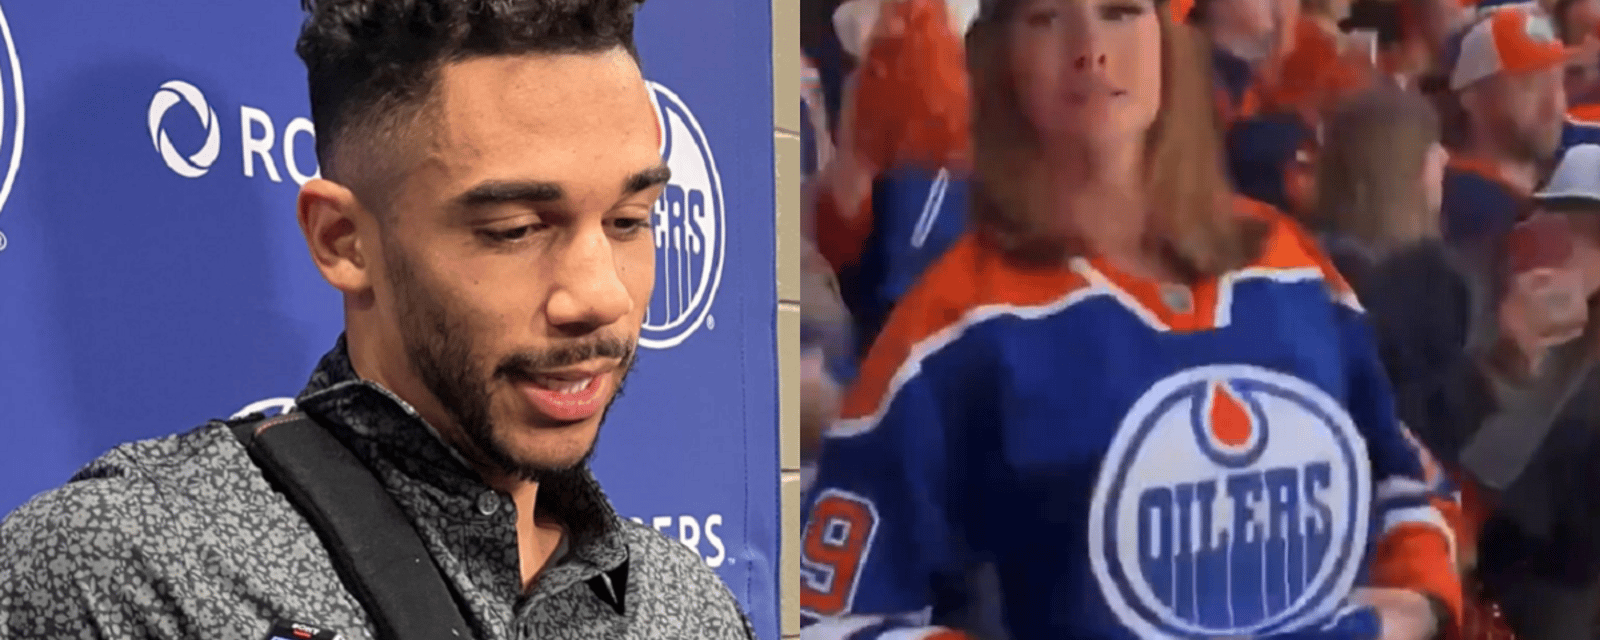 Evander Kane sounds off on 'passionate' Oilers fan.